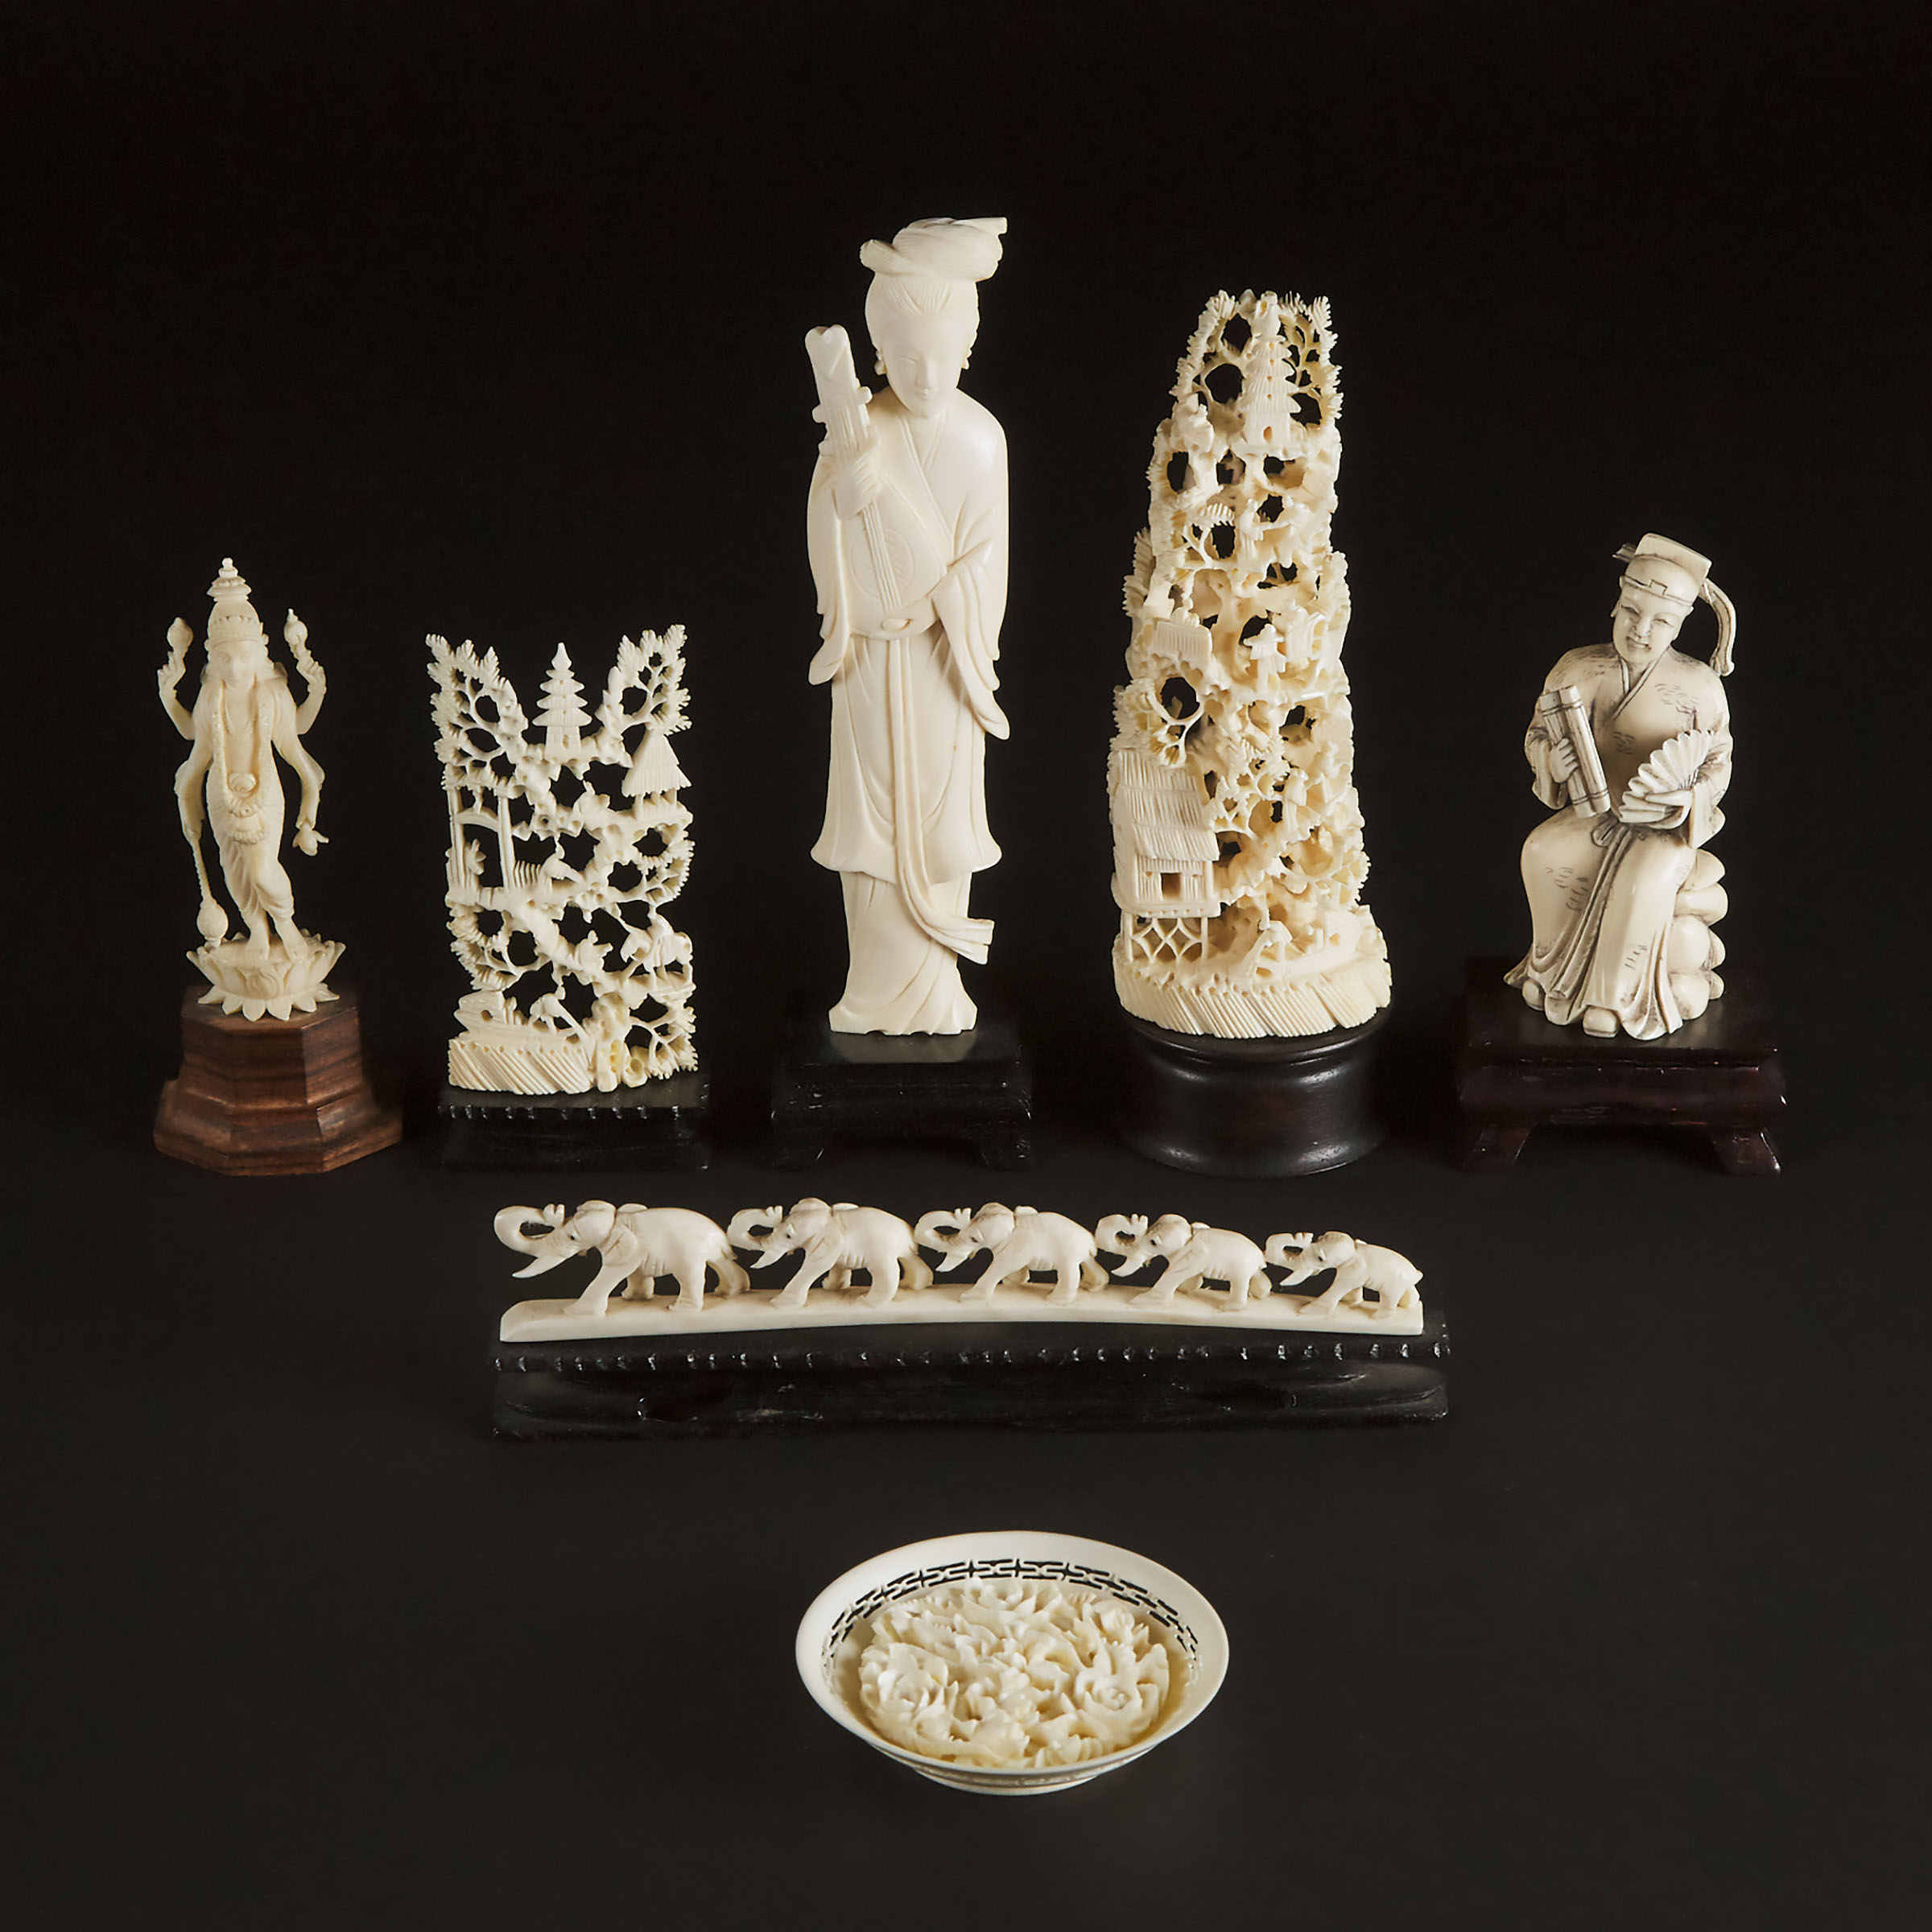 A Group of Five Chinese Ivory Carvings, Together With Two Indian Ivory Carvings